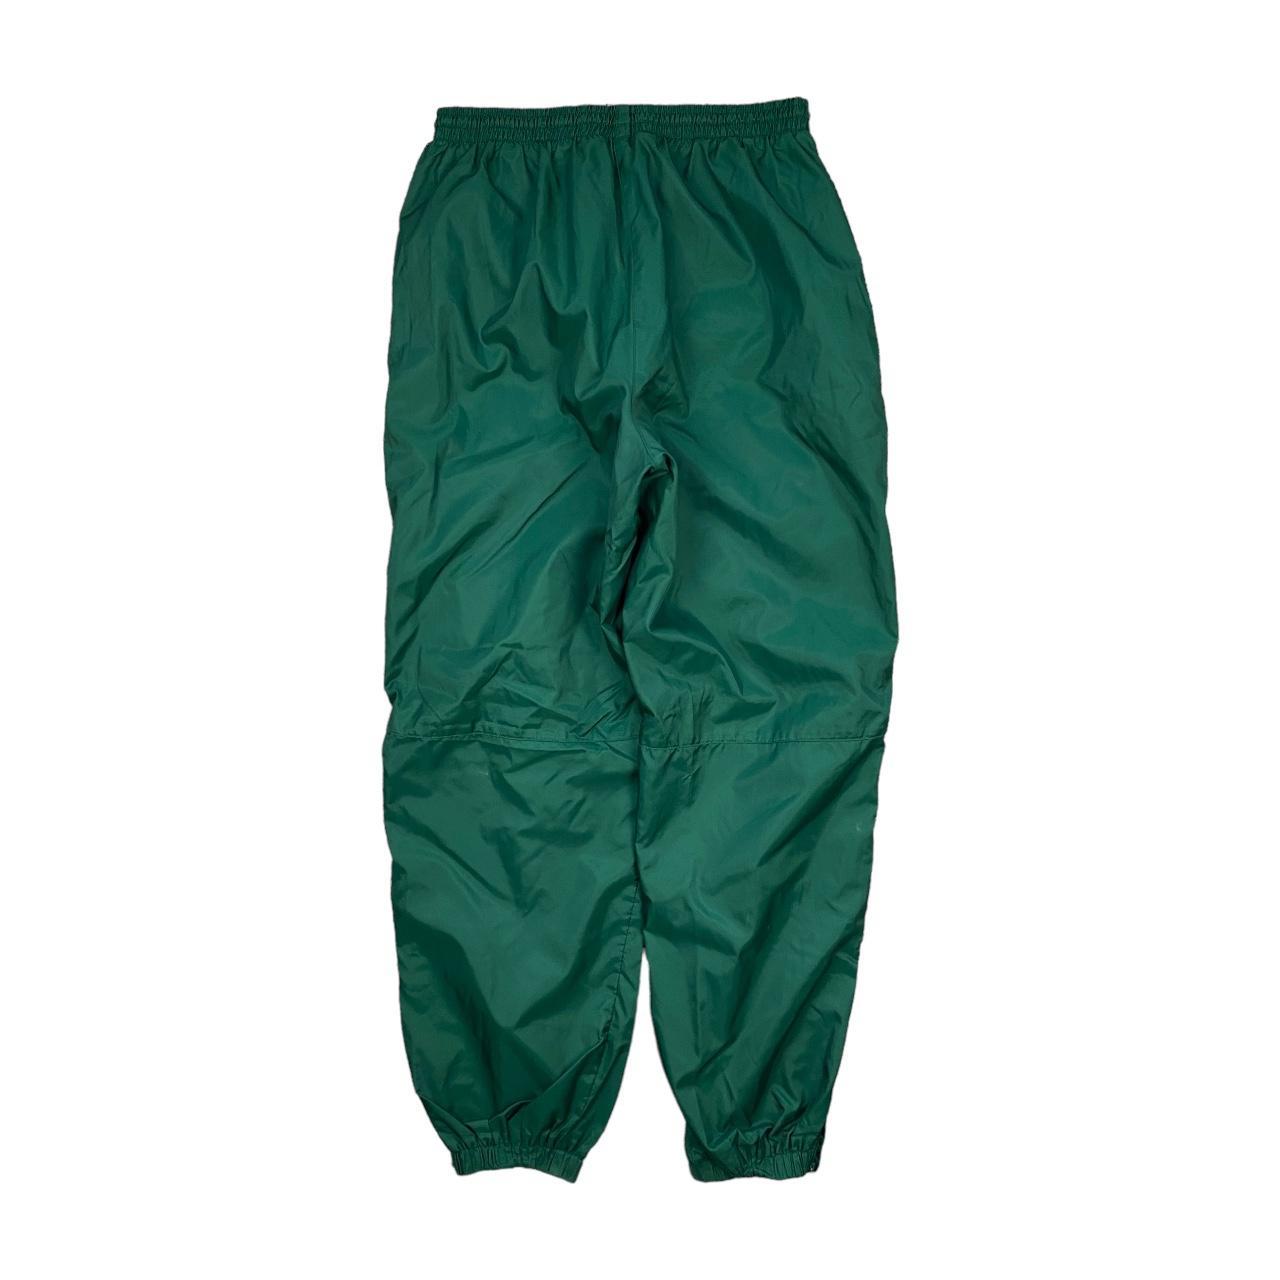 NWT Rare Adidas Vintage Nylon Forest Green Track Pants Youth Large